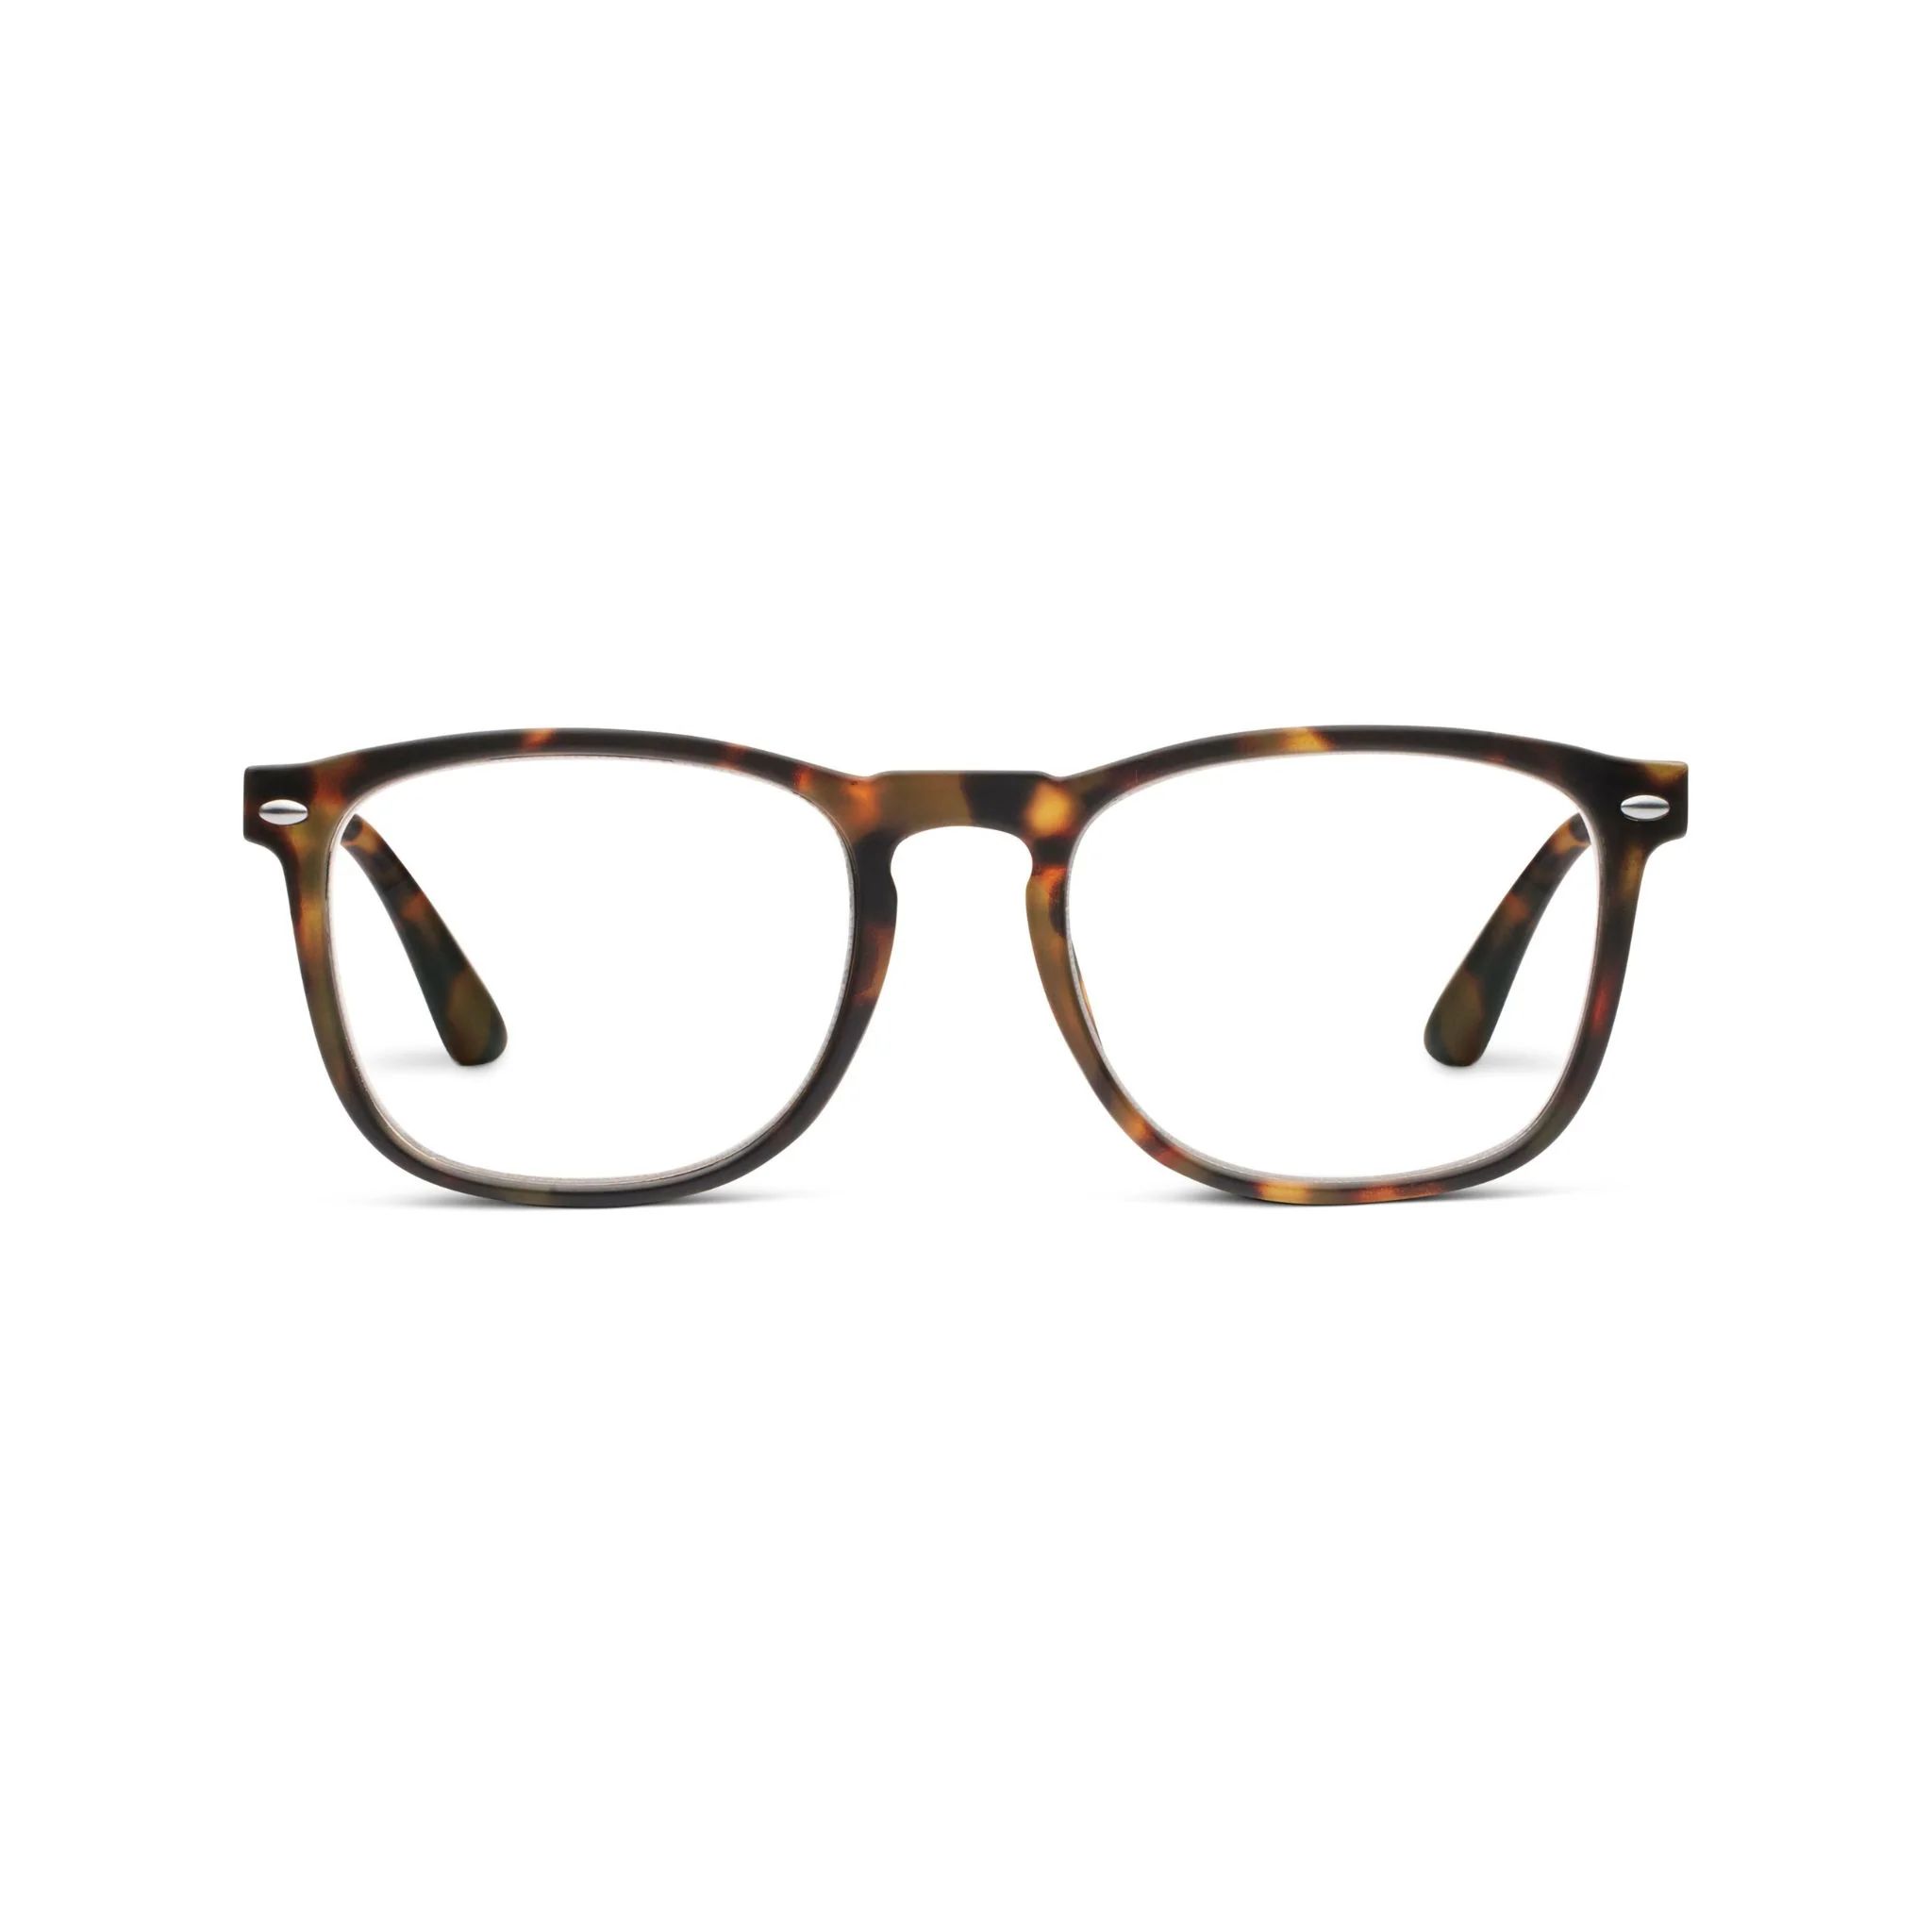 Dylan (Blue Light) - Tortoise / Reading / 2.50 - Peepers by PeeperSpecs | Peepers